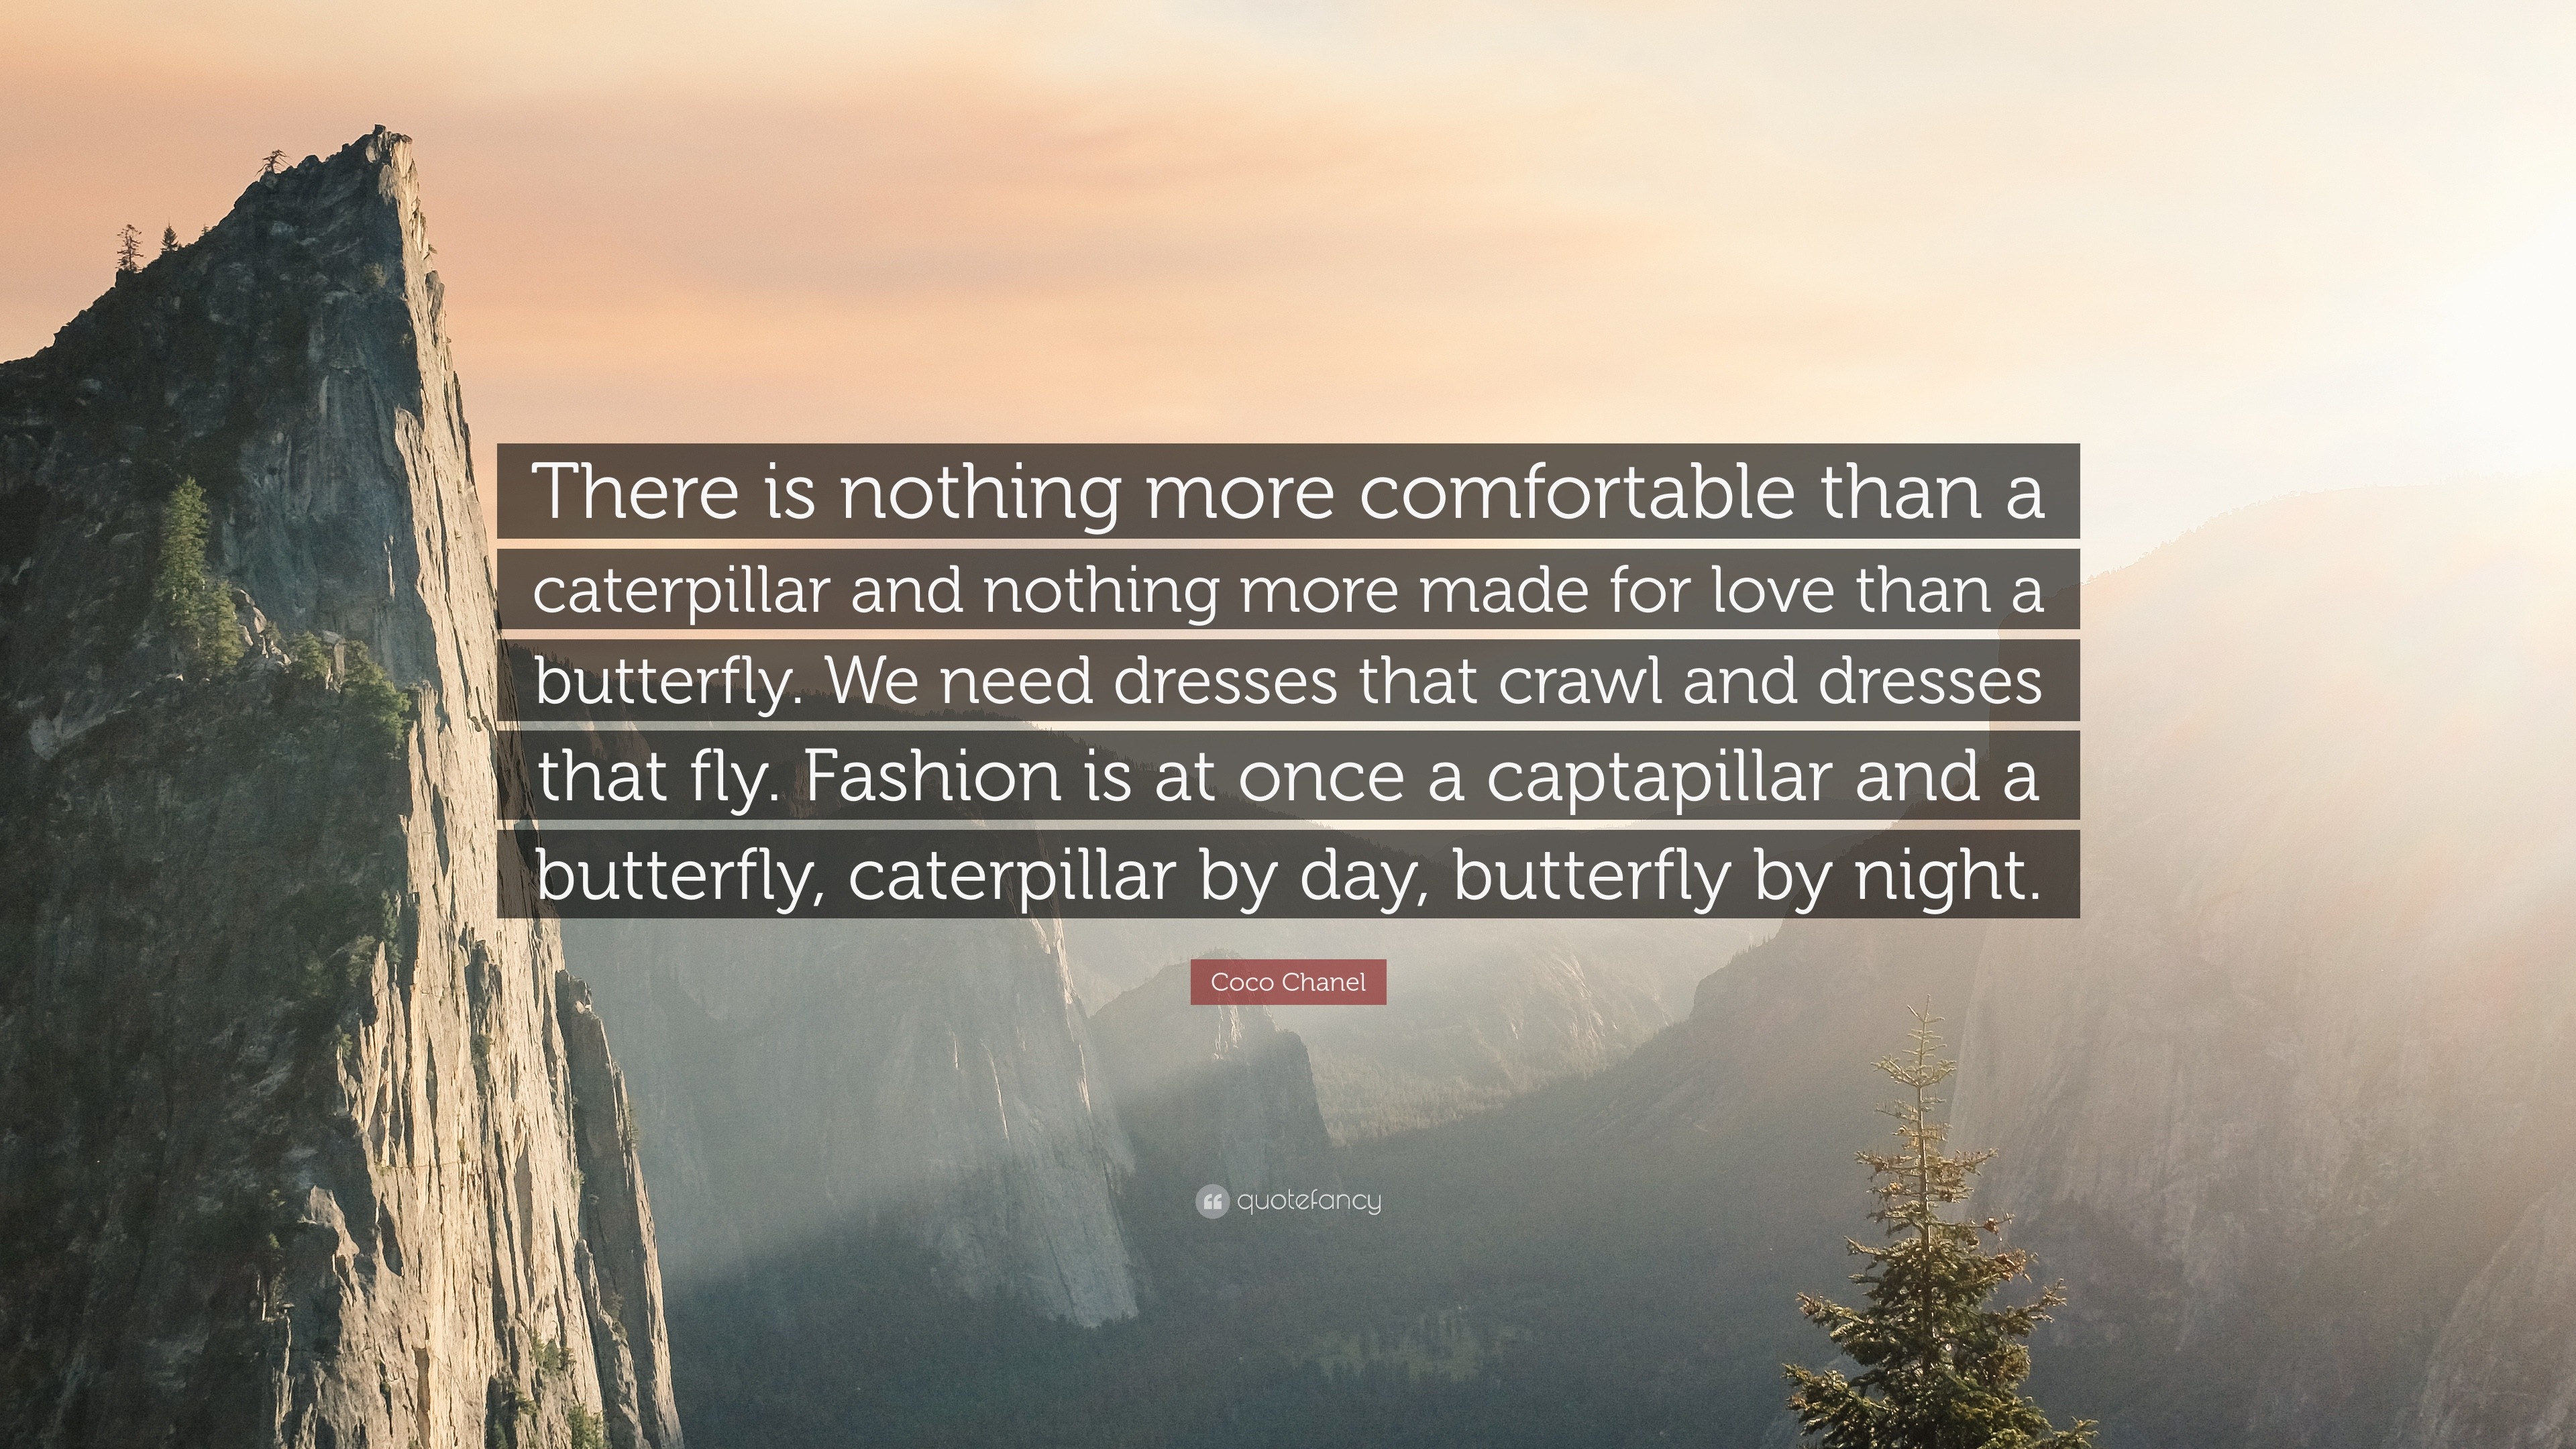 Coco Chanel Quote: “There is nothing more comfortable than a caterpillar  and nothing more made for love than a butterfly. We need dresses th”